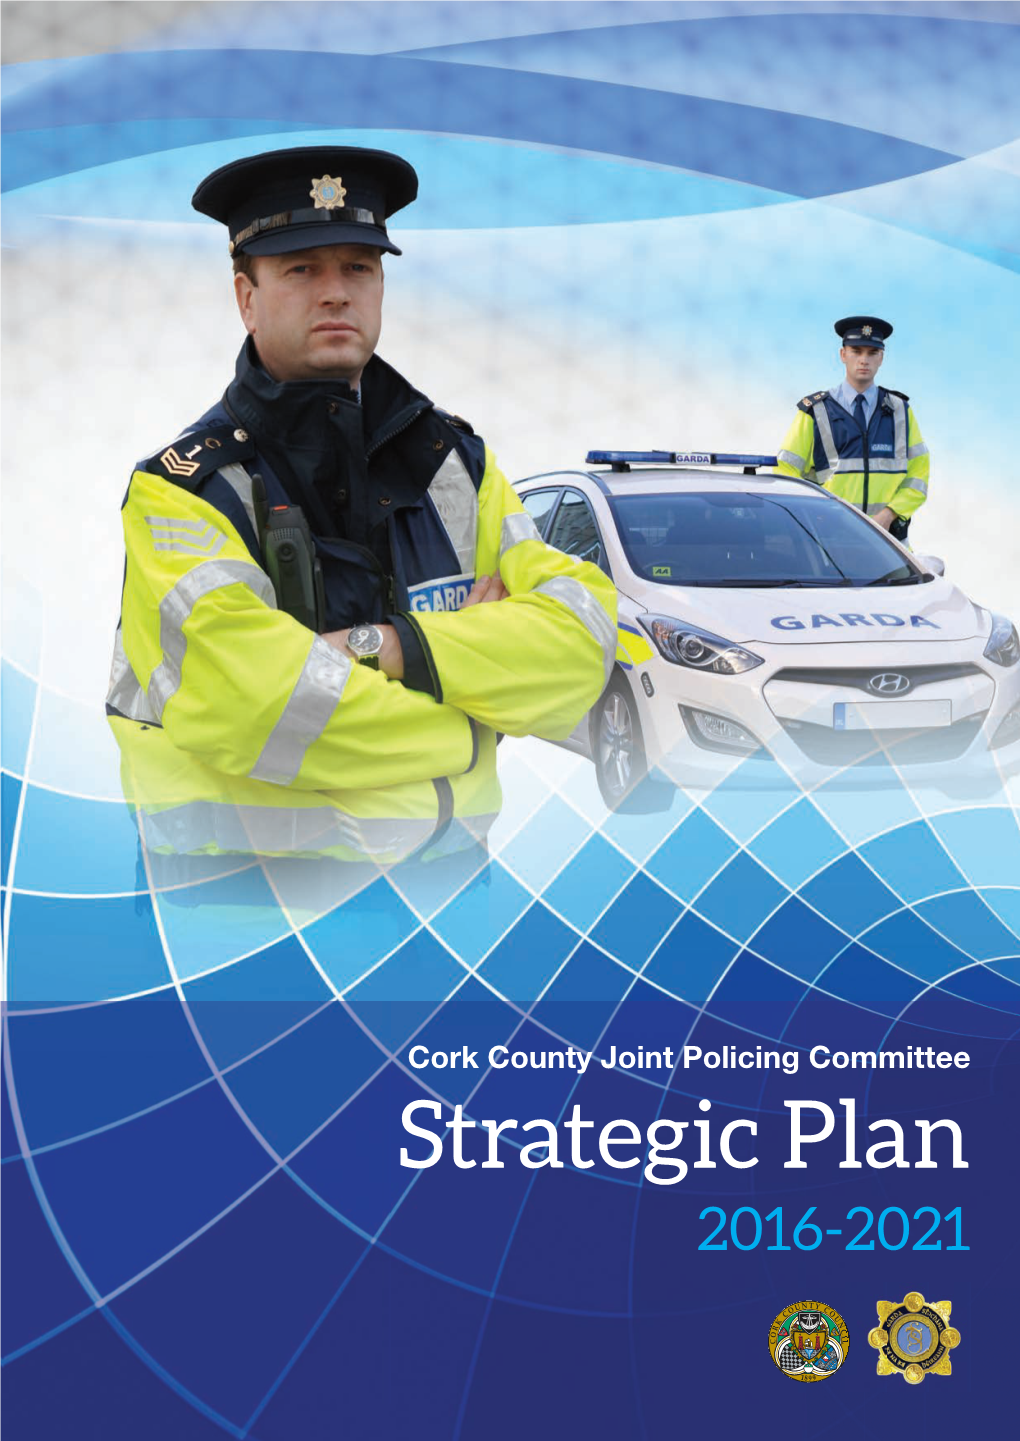 Cork County Joint Policing Committee Strategic Plan 2016-2021